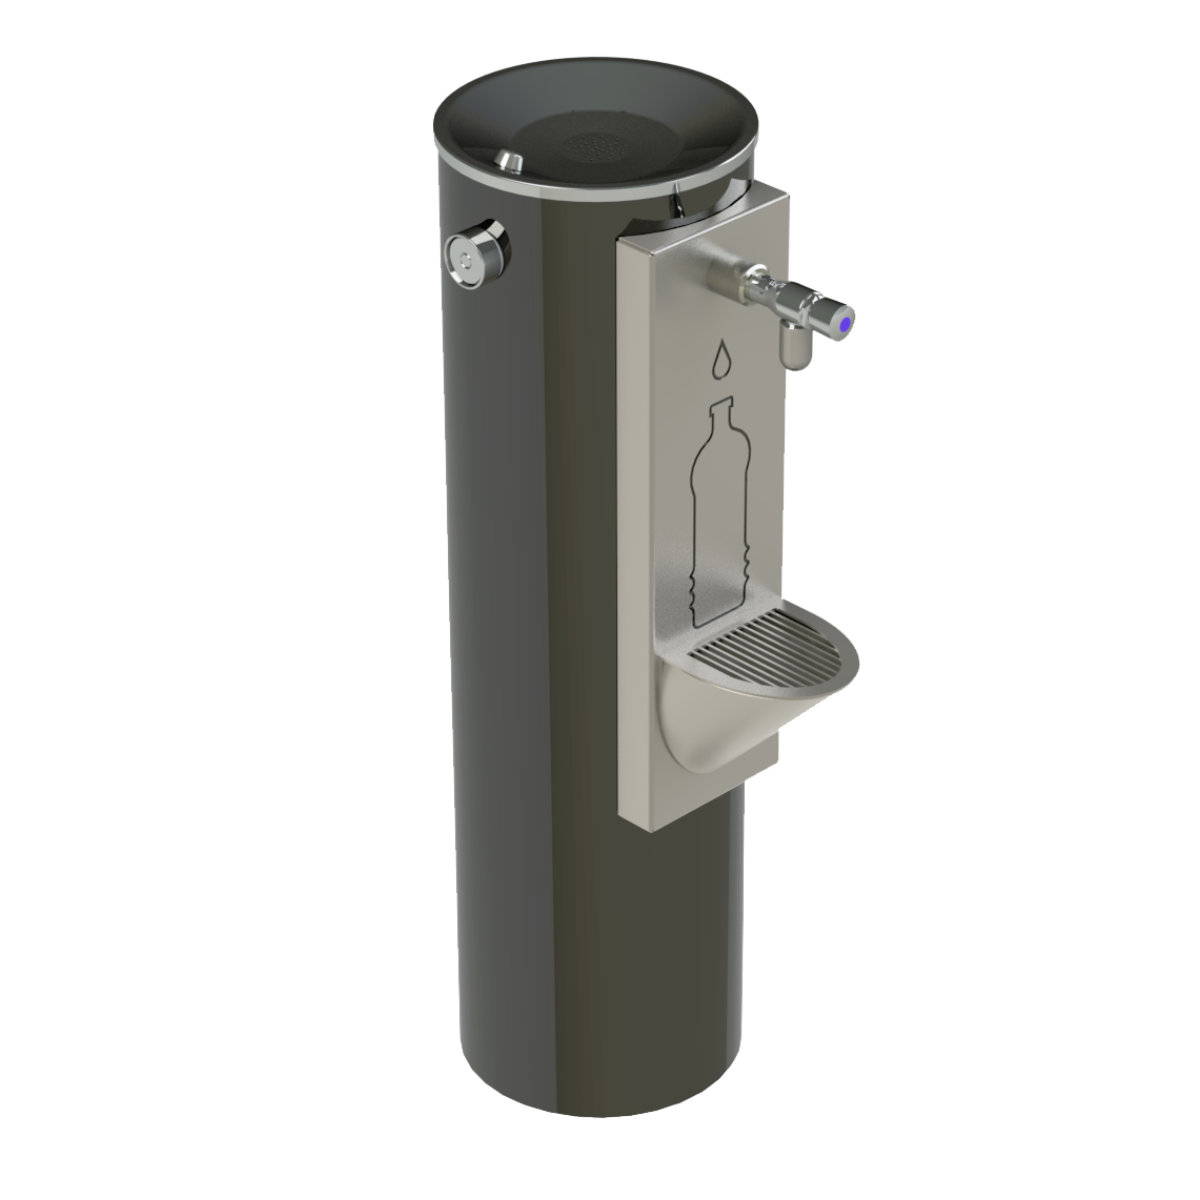 SU650 Outdoor Drinking Fountain Public water filling station